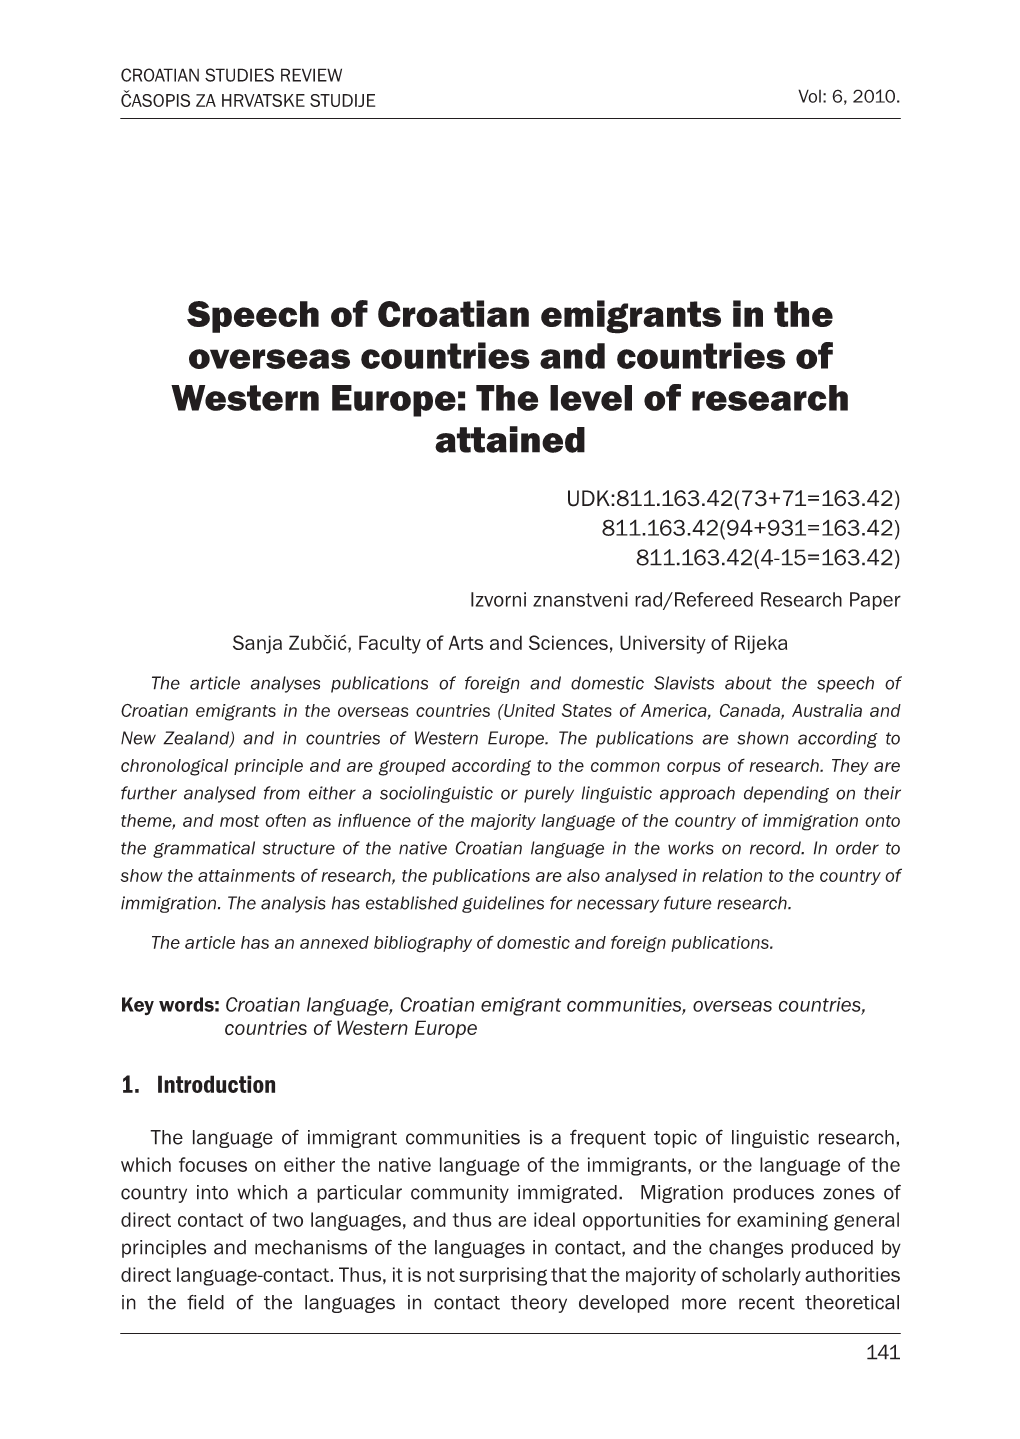 Speech of Croatian Emigrants in the Overseas Countries and Countries of Western Europe: the Level of Research Attained